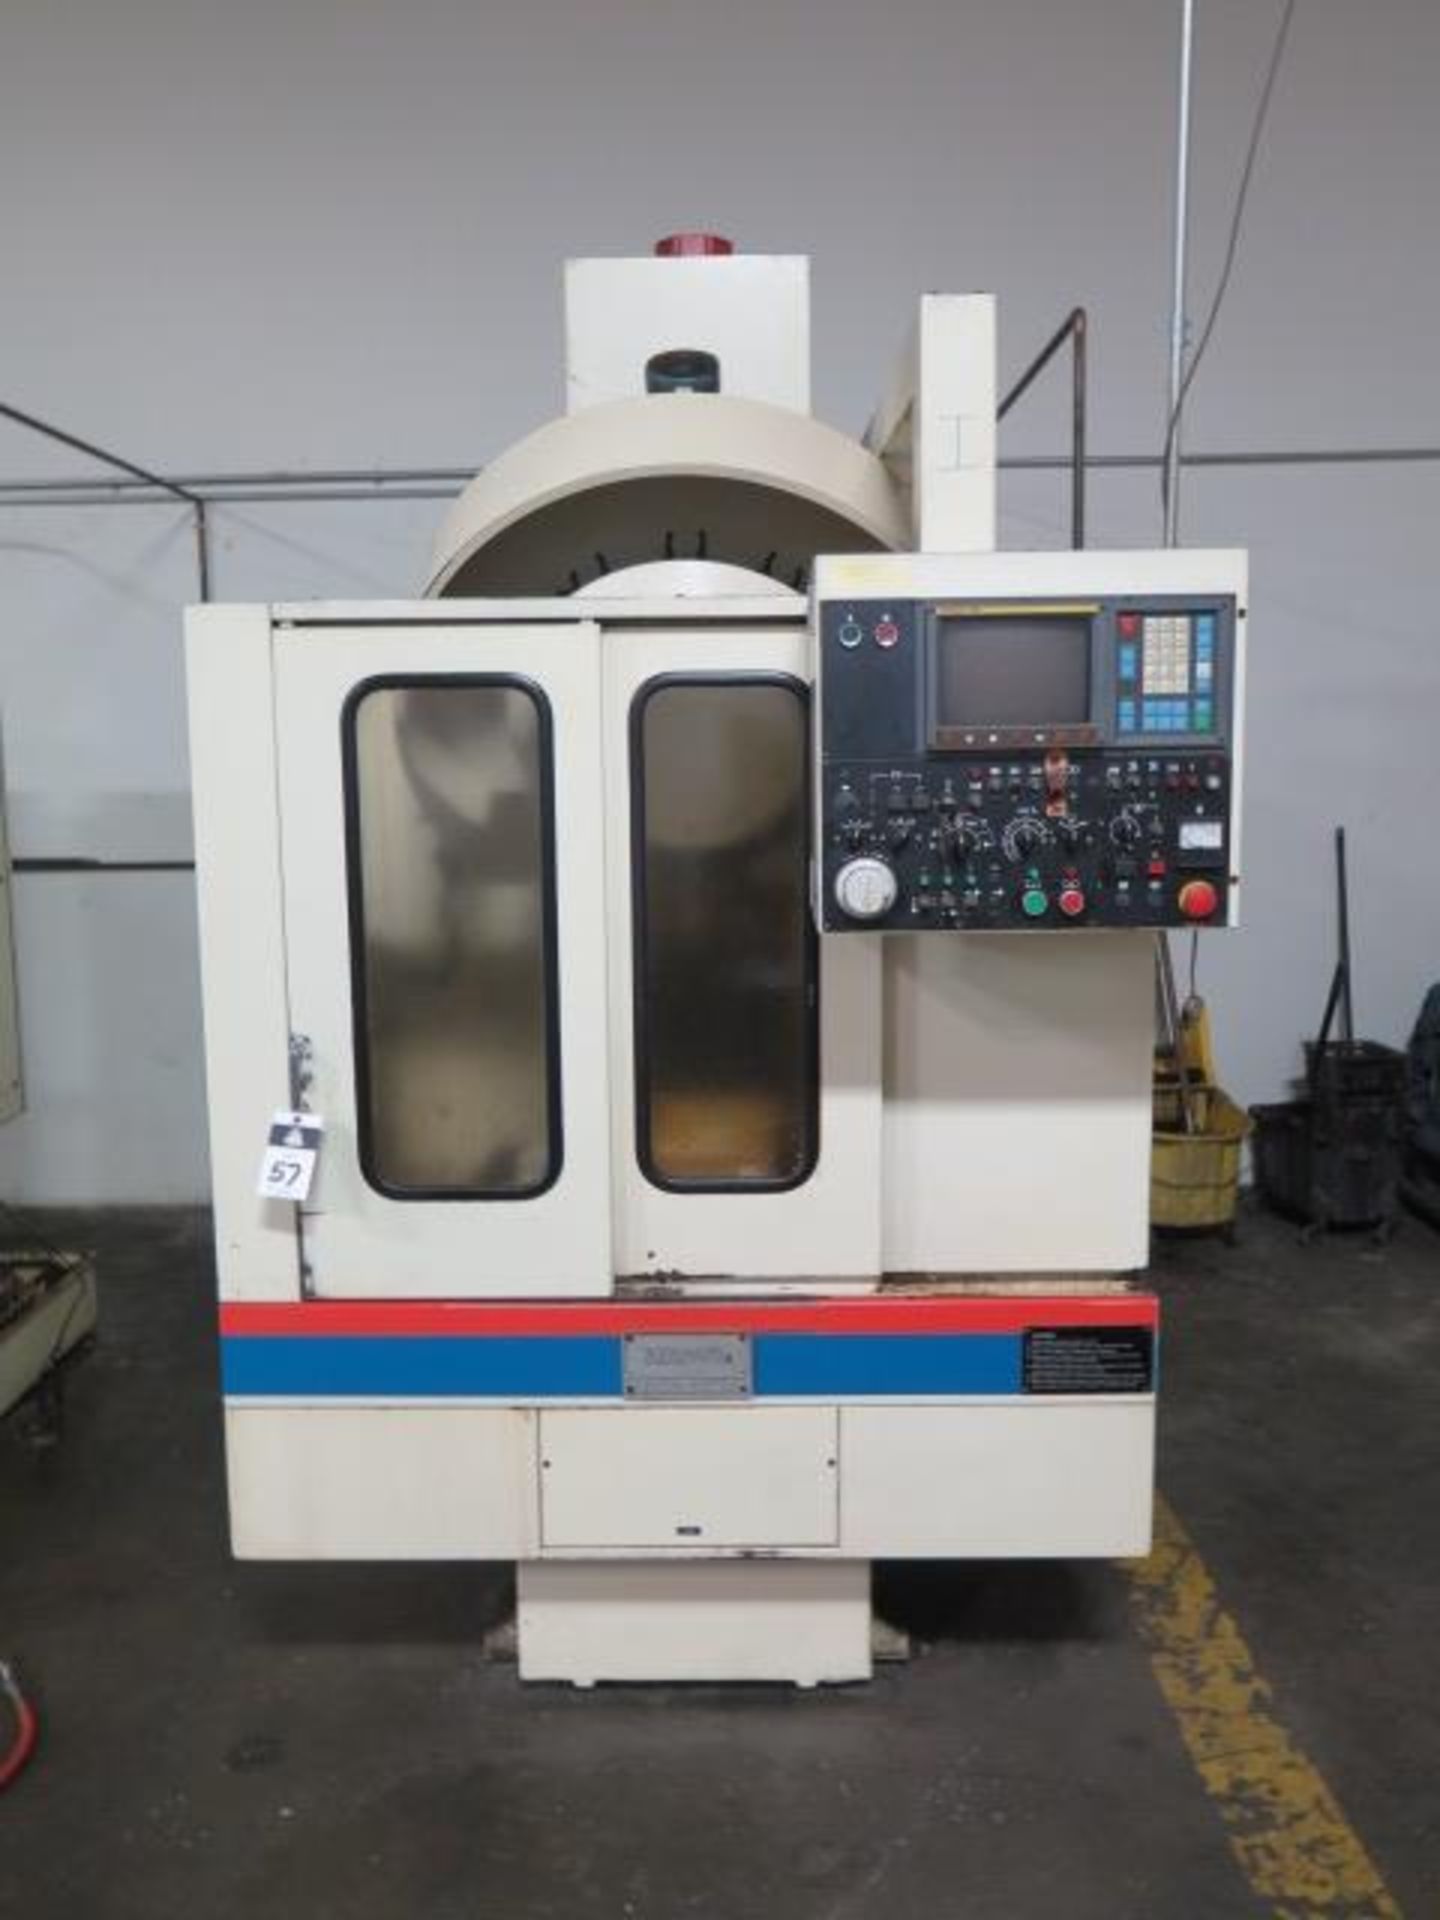 Takisawa MAC-V1E CNC Drilling/Tapping Center s/n TMYP8181 (X AXIS MOTOR MAKING NOISE), SOLD AS IS